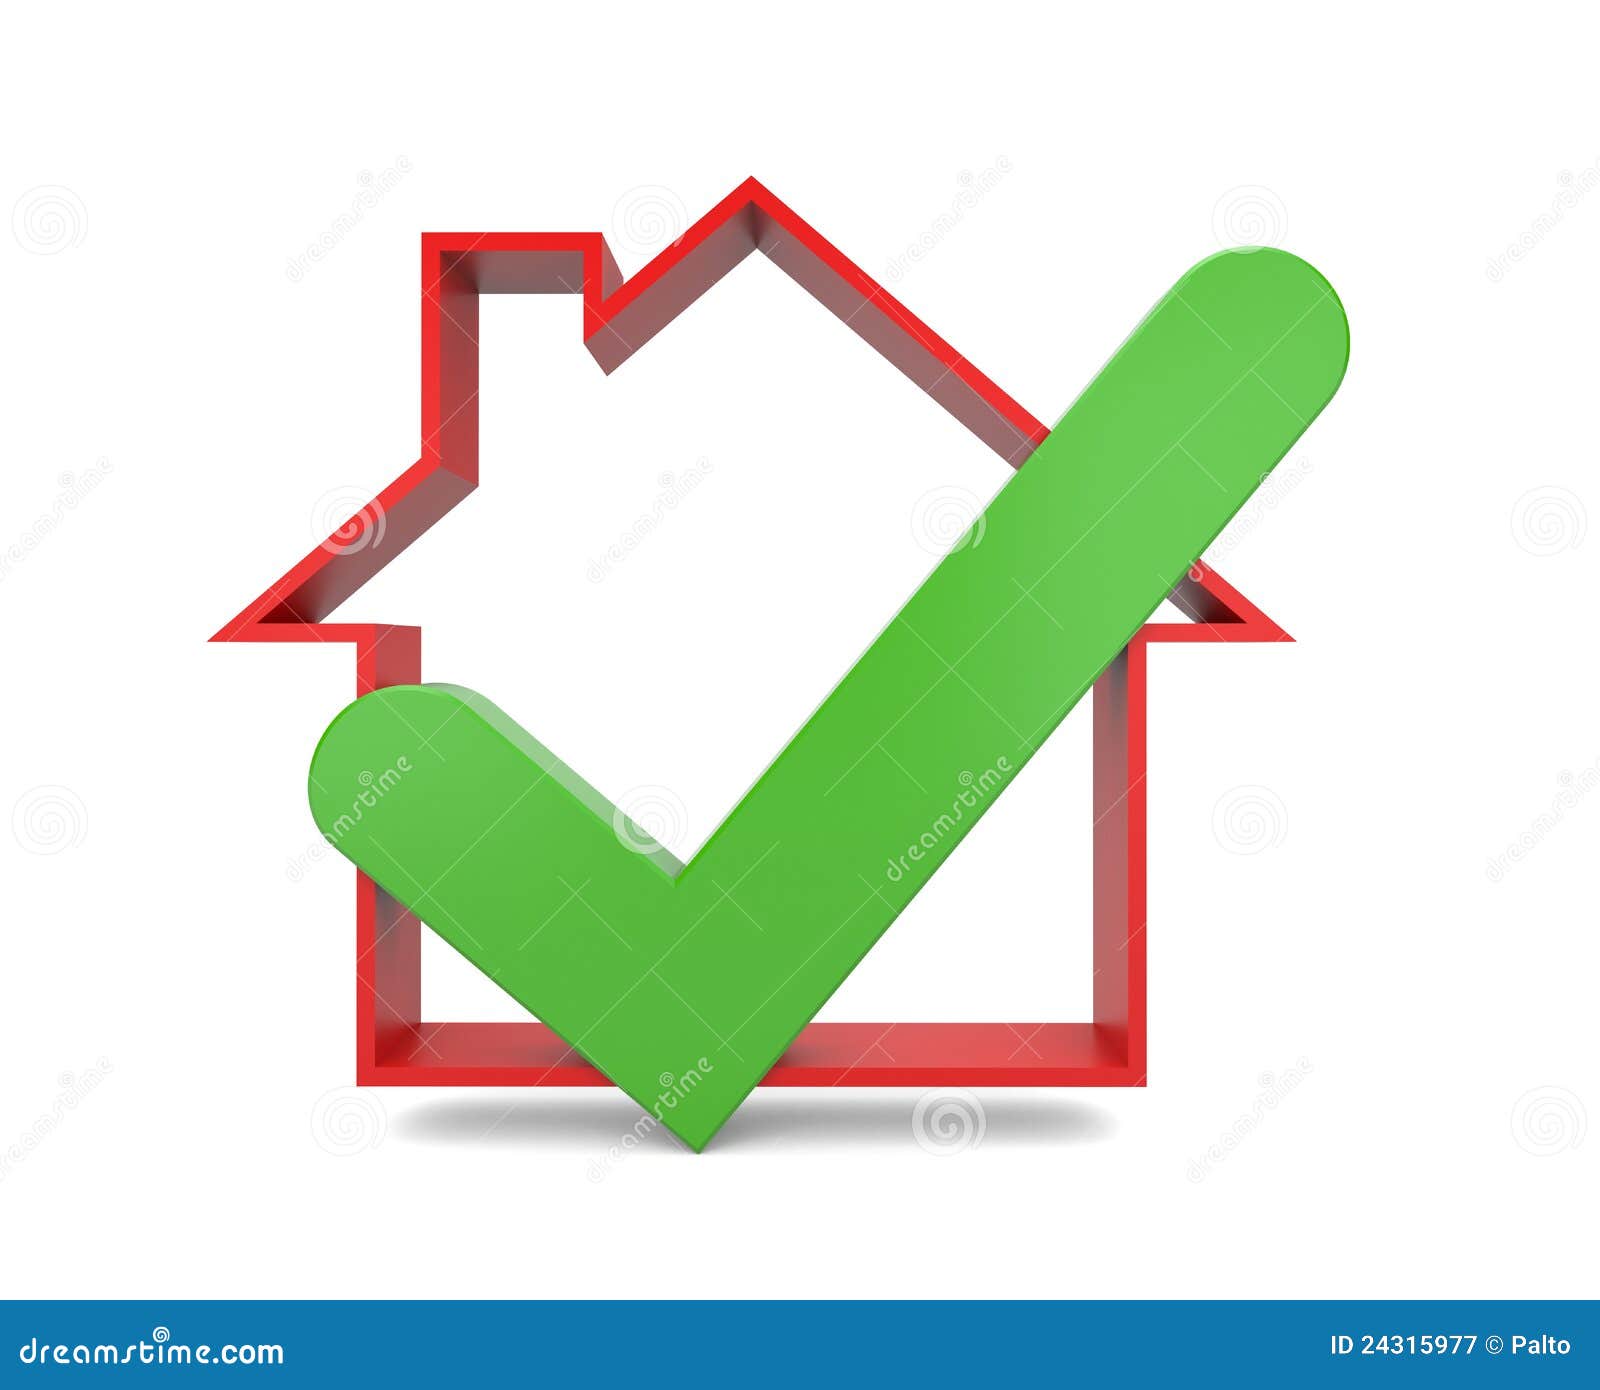 home inspection clipart - photo #12